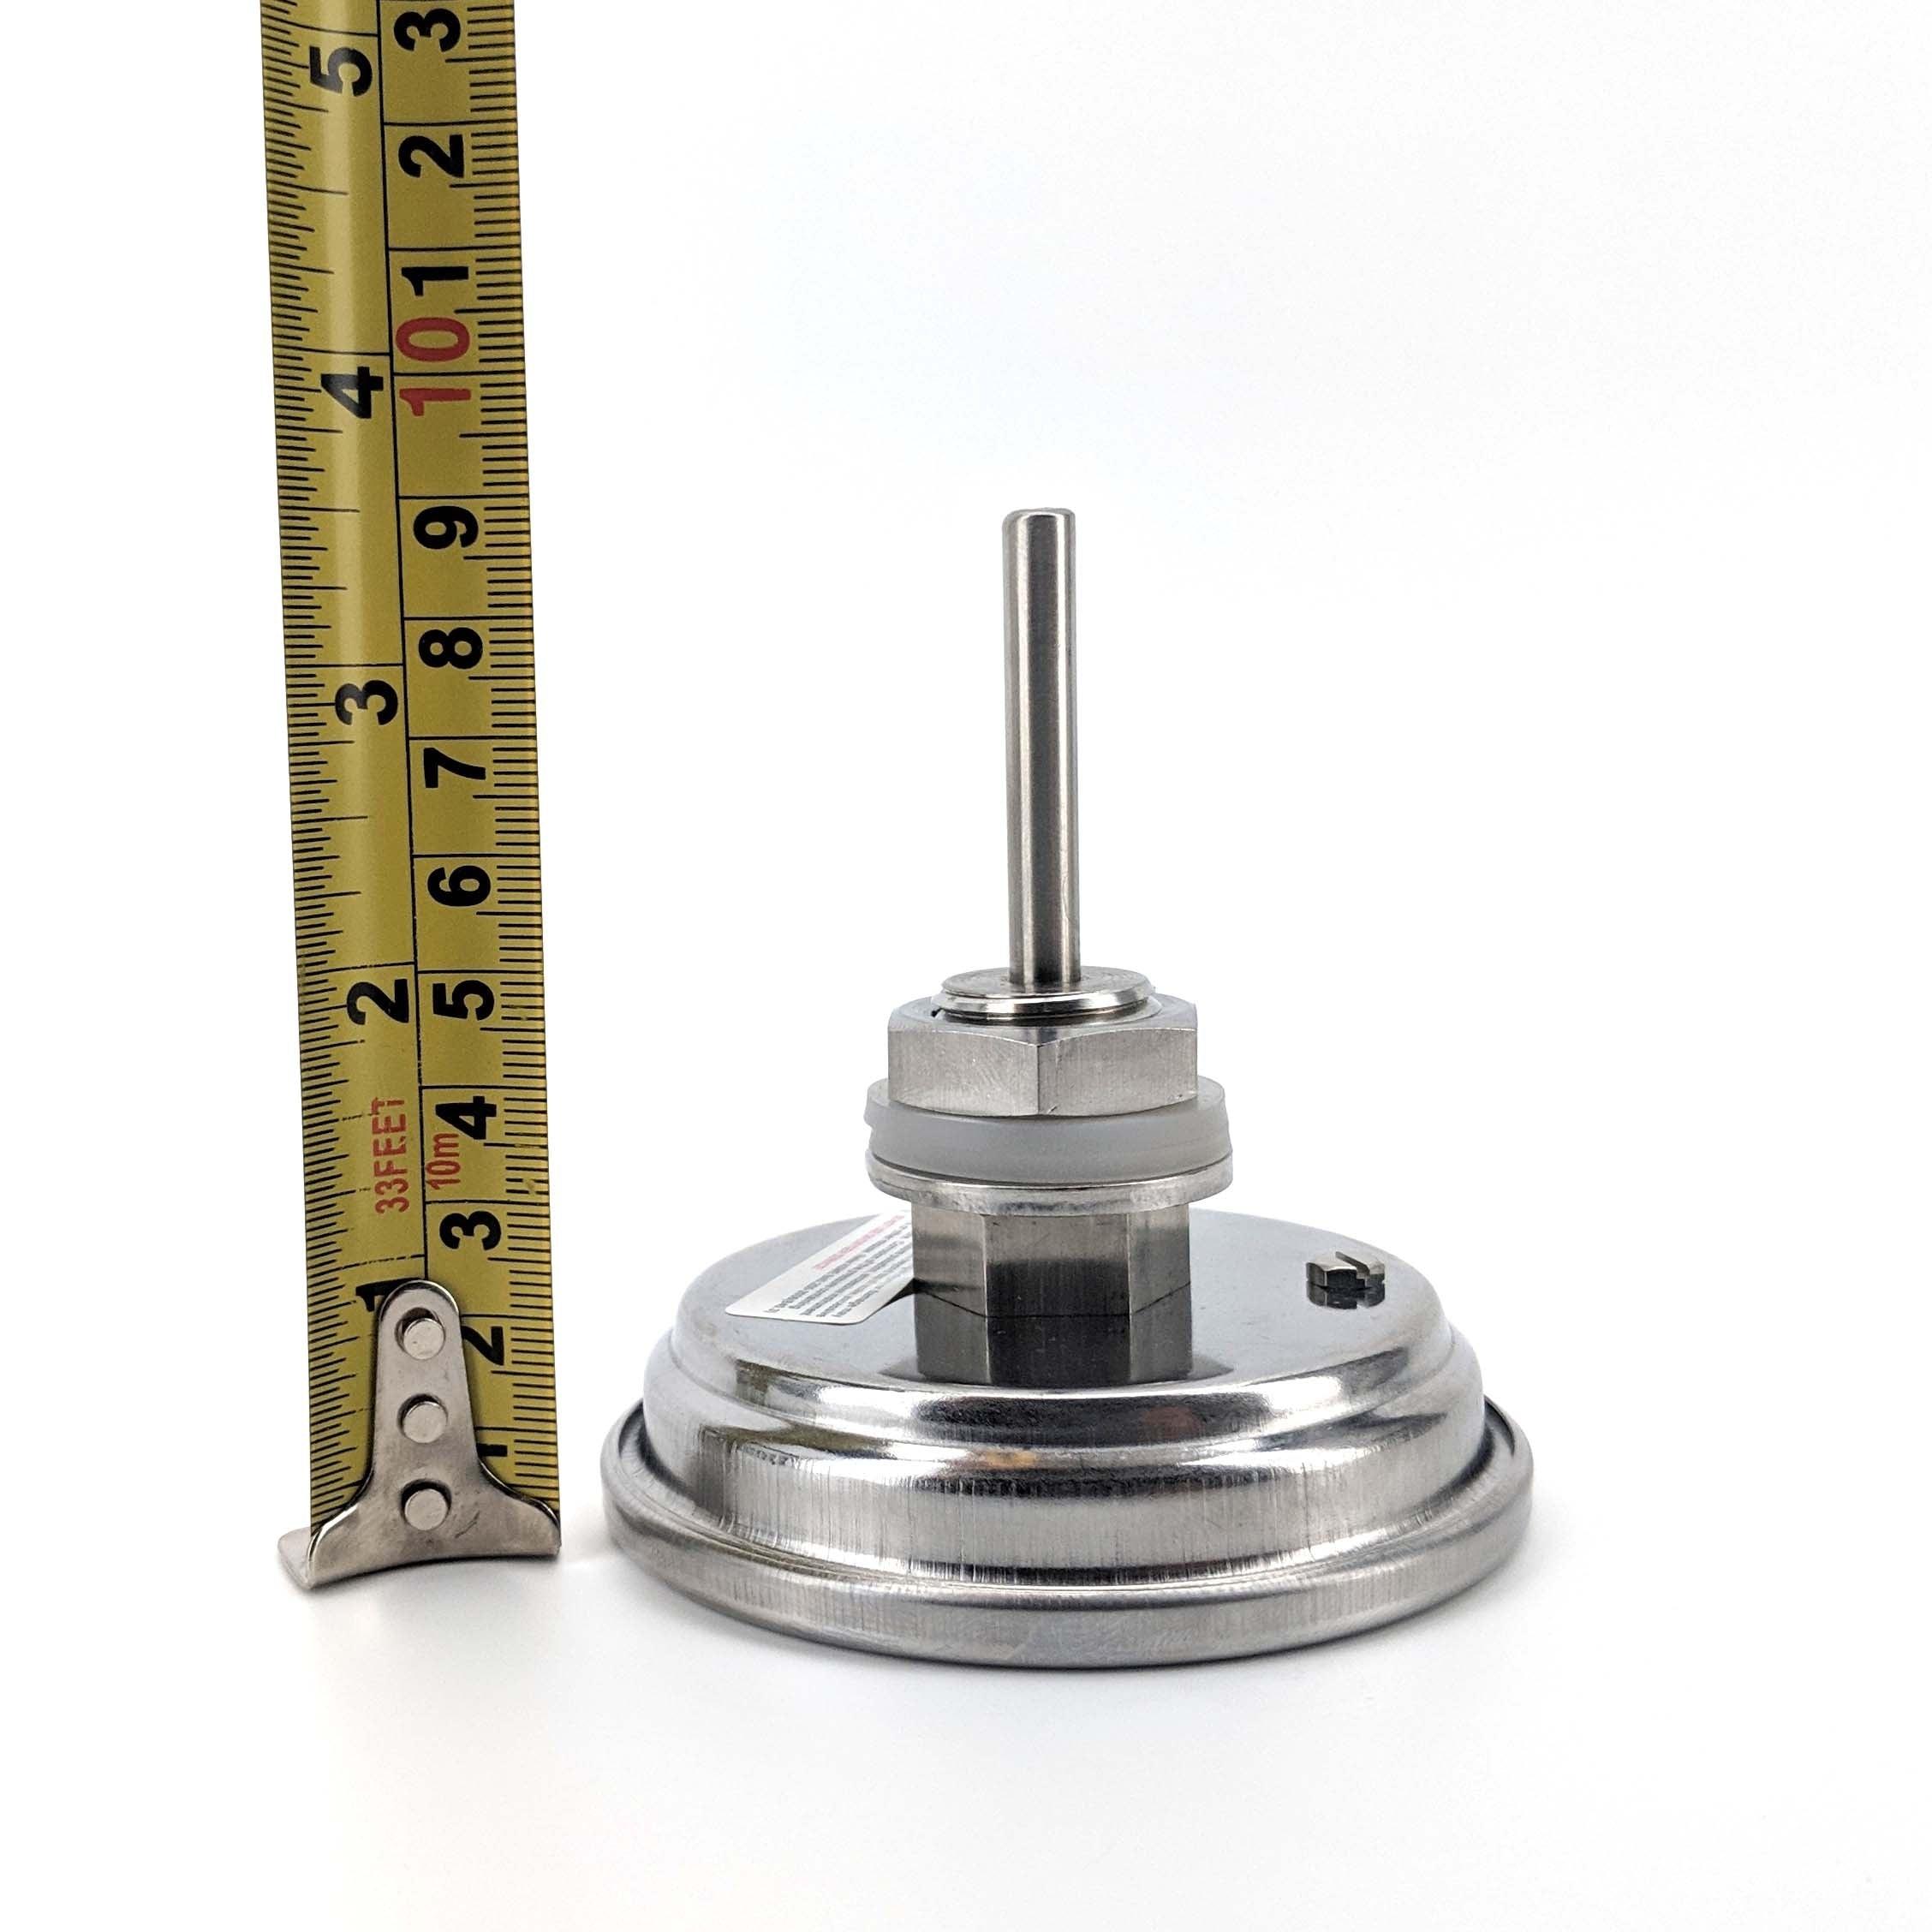 3 Inch Dial Thermometer, Weldless Fixed - UNF in Brewing